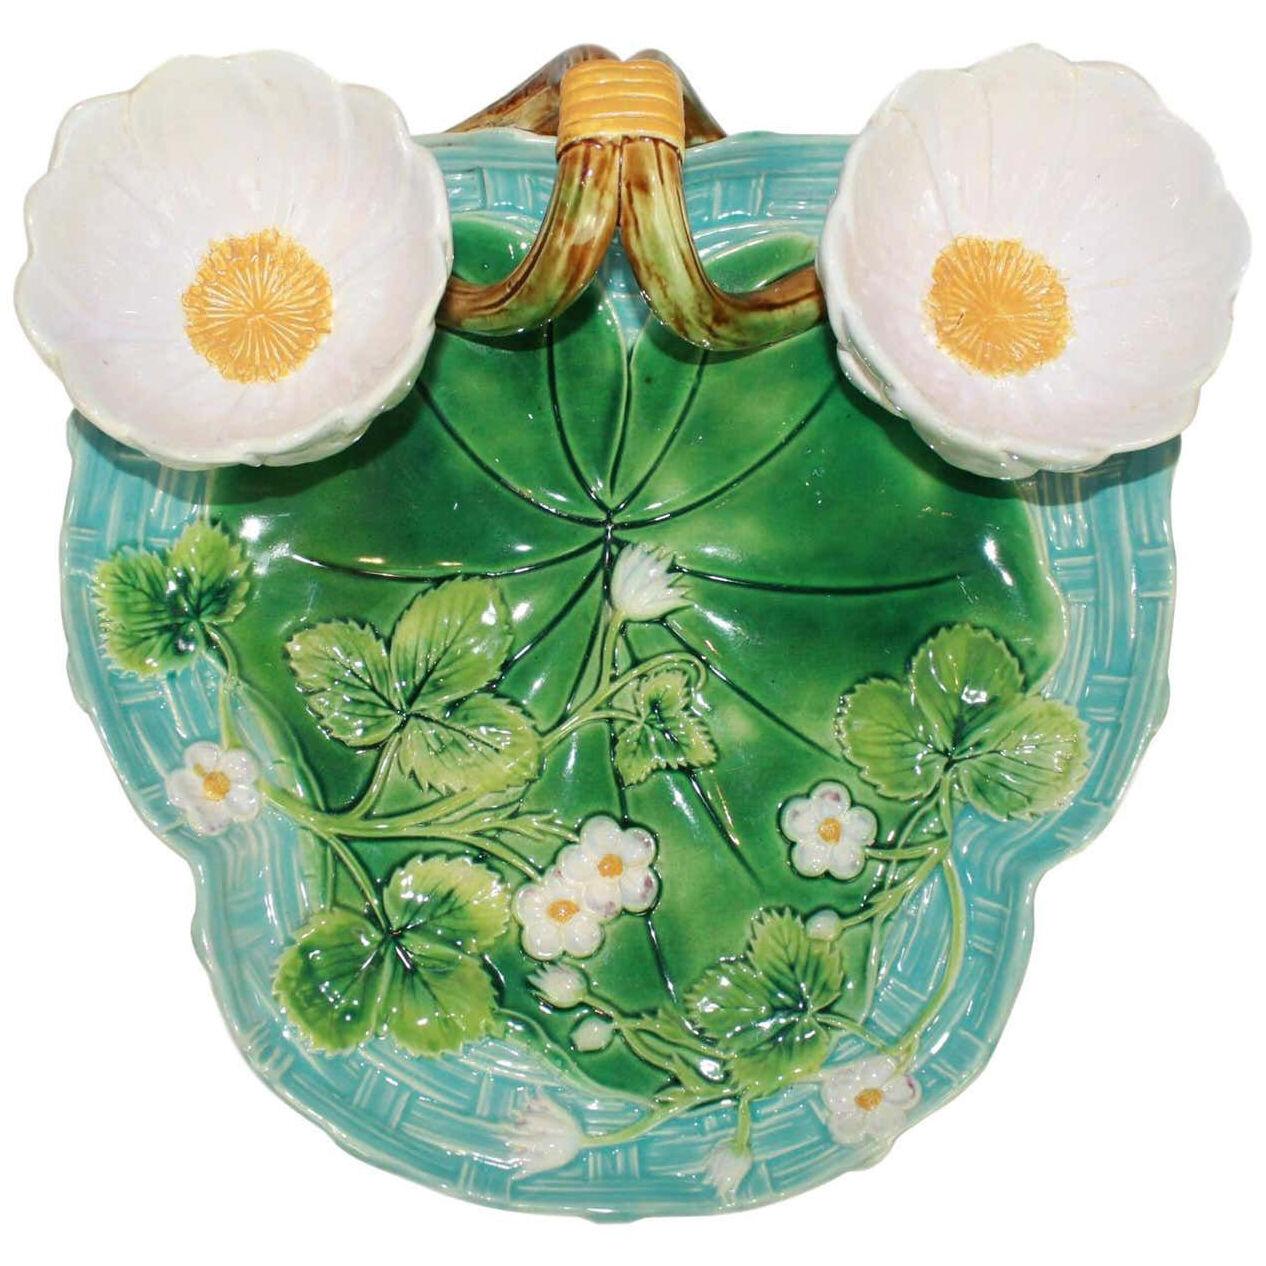 George Jones Majolica Strawberry Server Turquoise and Green, English, Dated 1877